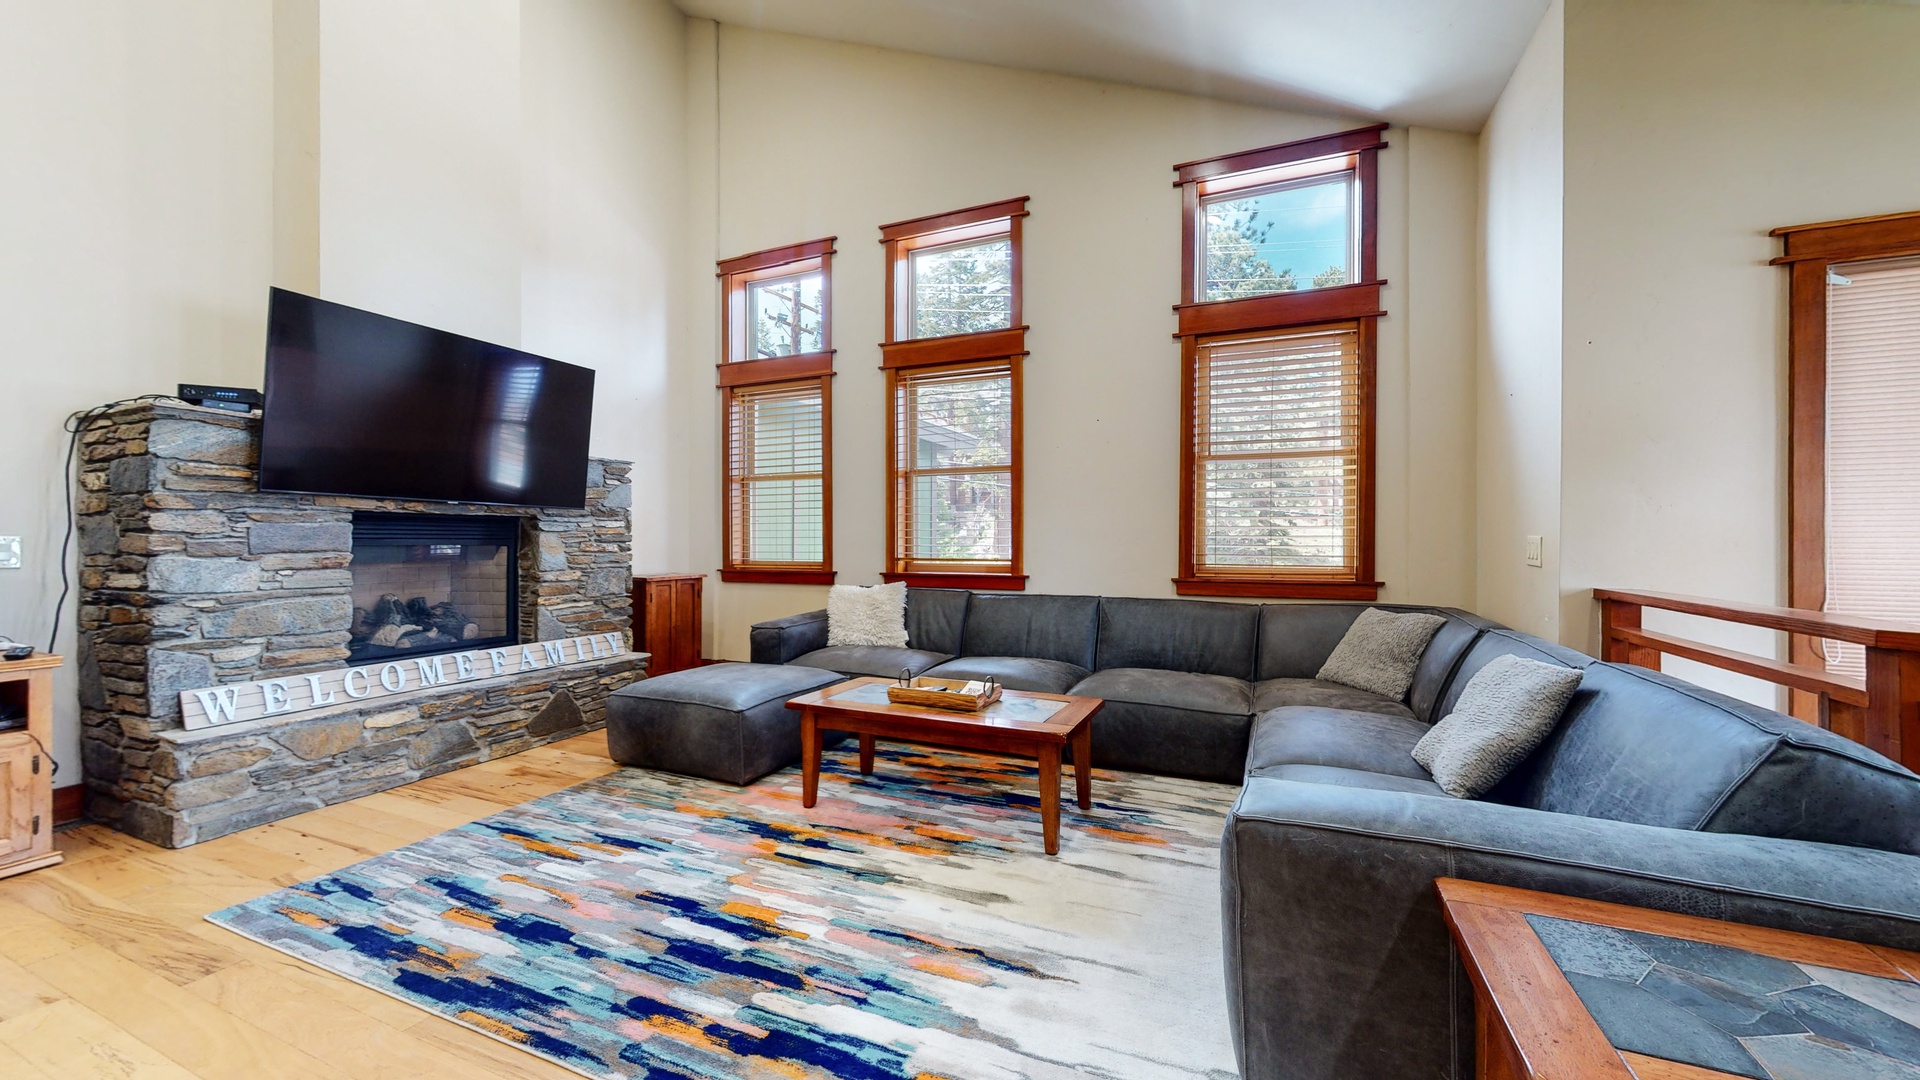 Living room with flat screen TV, gas fireplace and comfortable seating